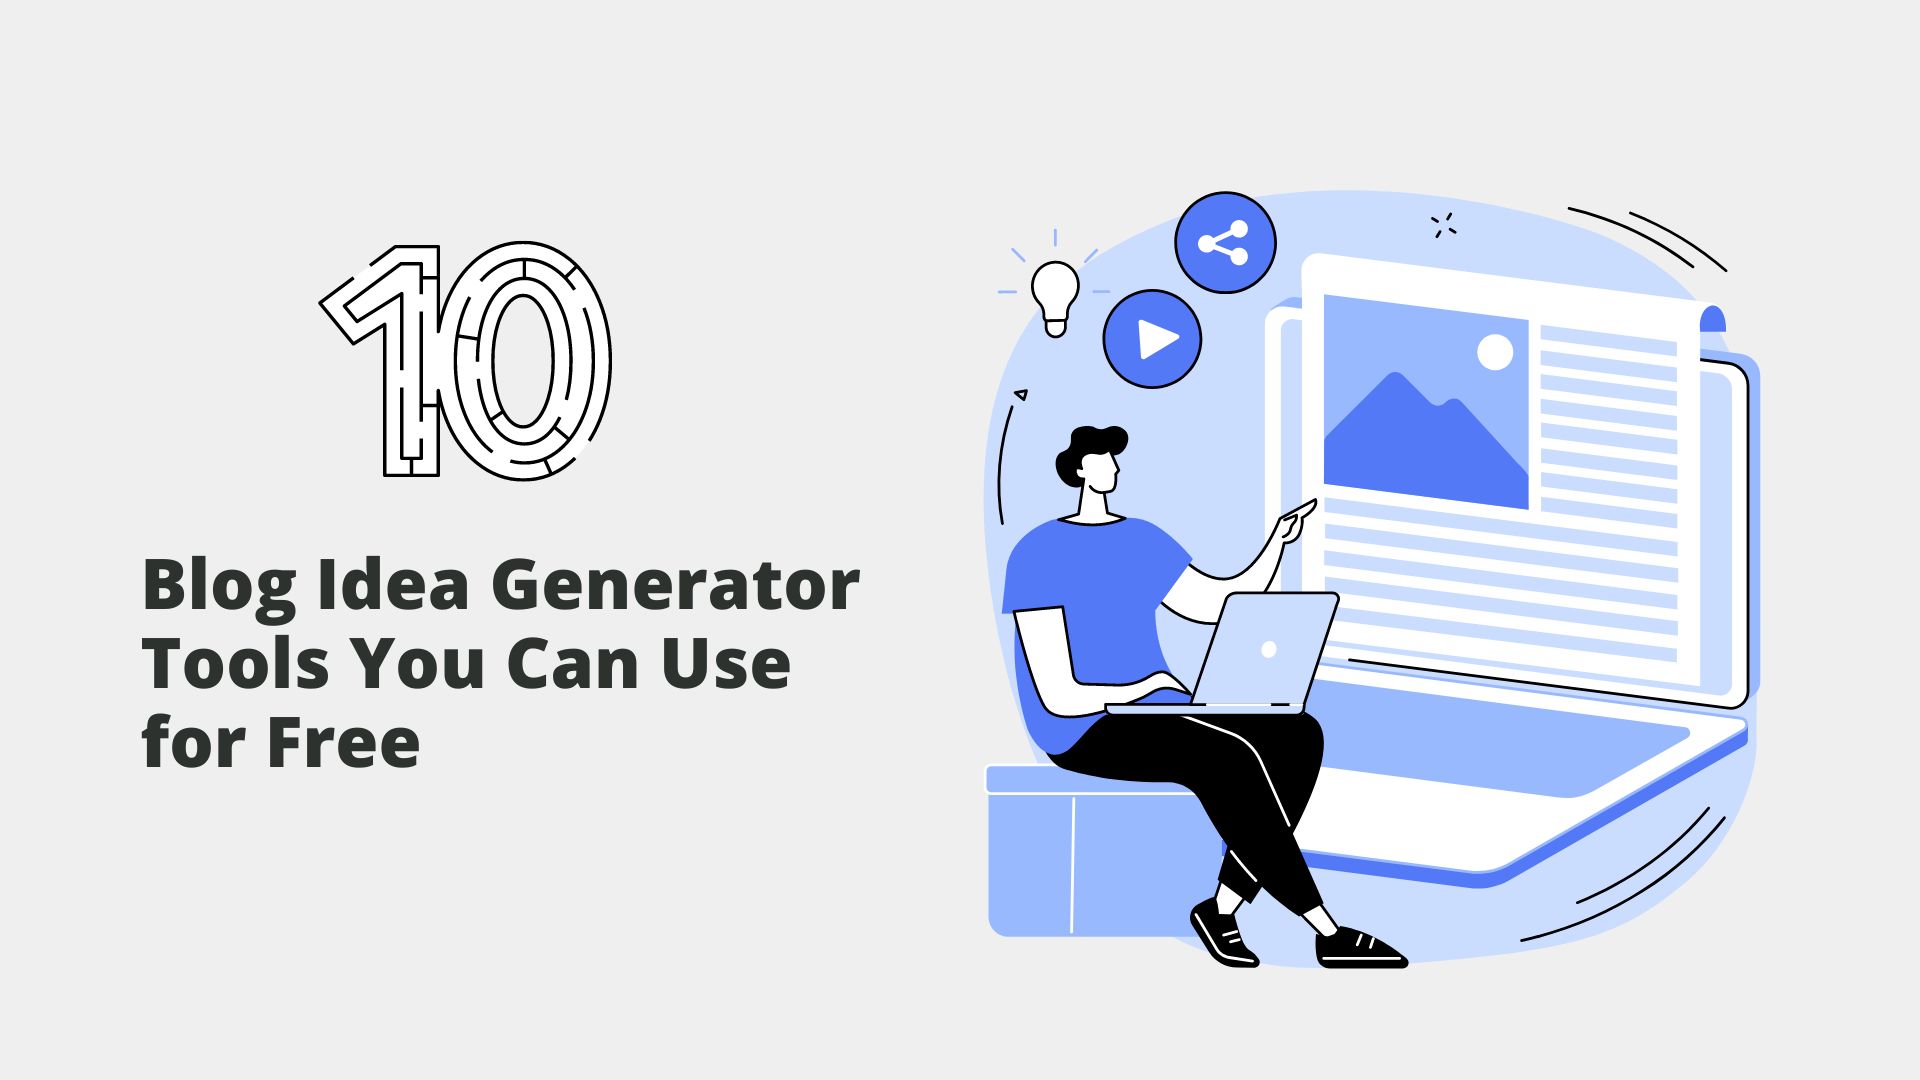 Blog Idea Generator Tools You Can Use for Free